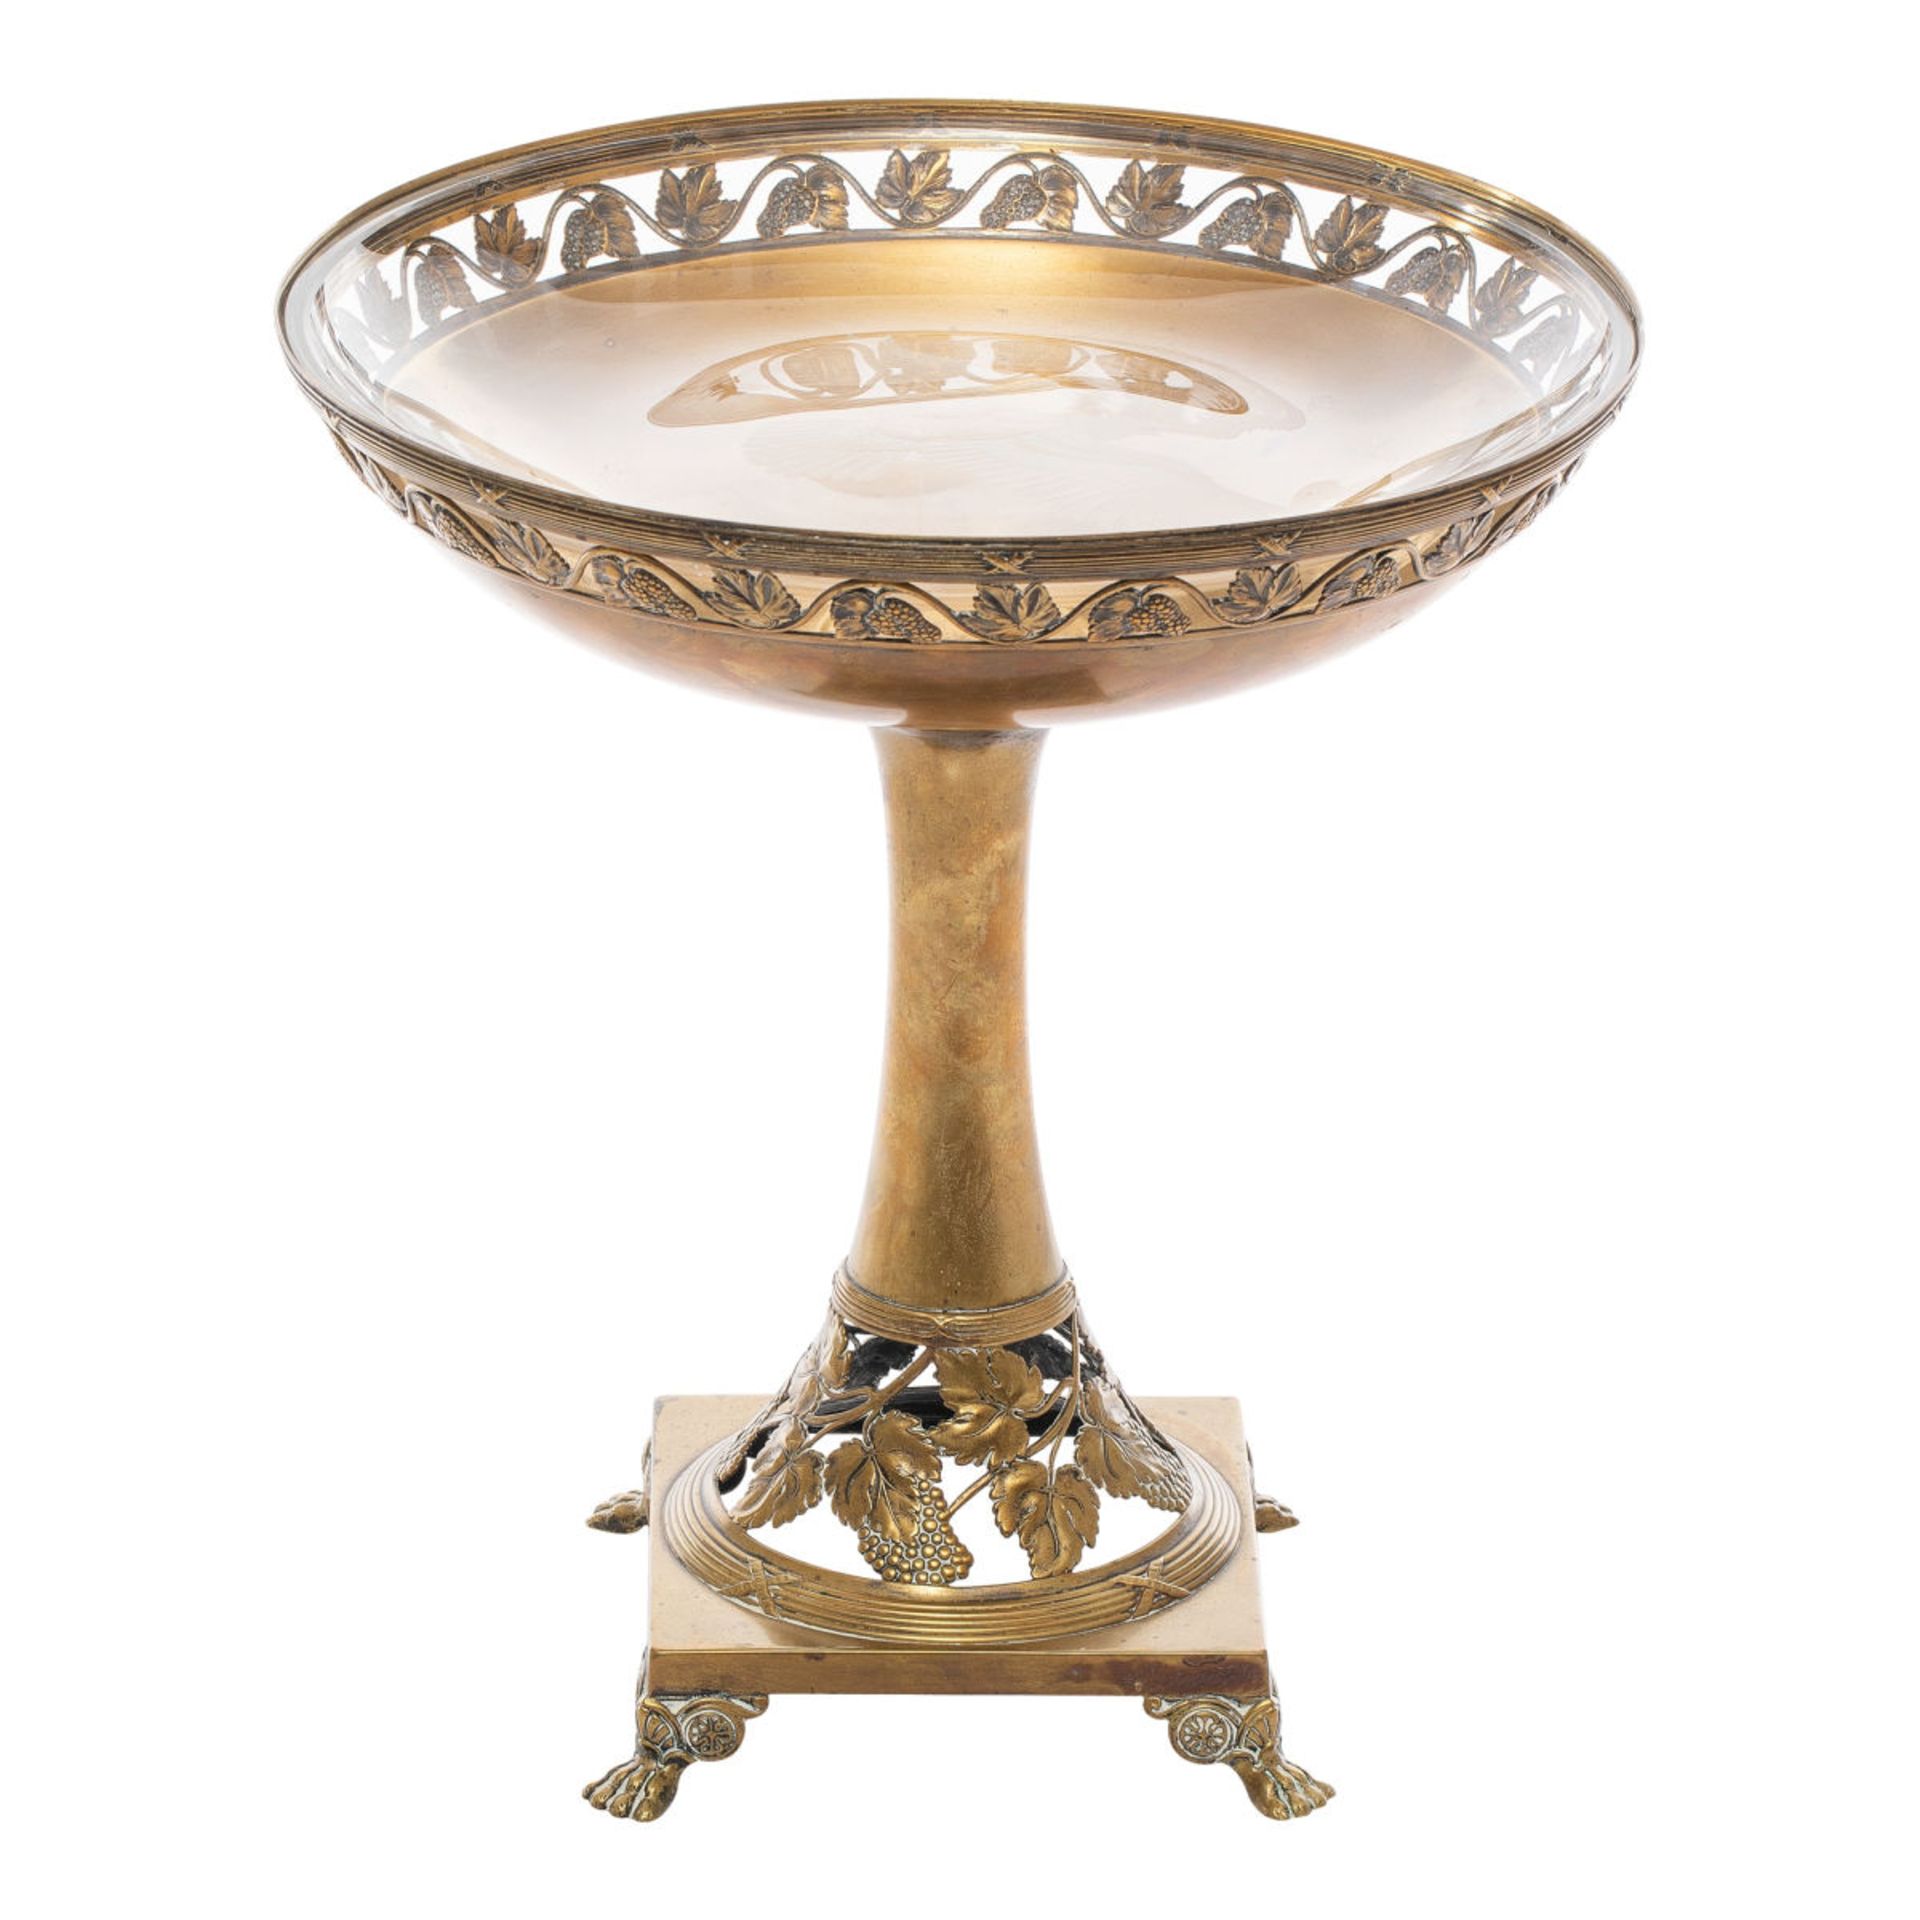 Centrepiece bowl with glass insert